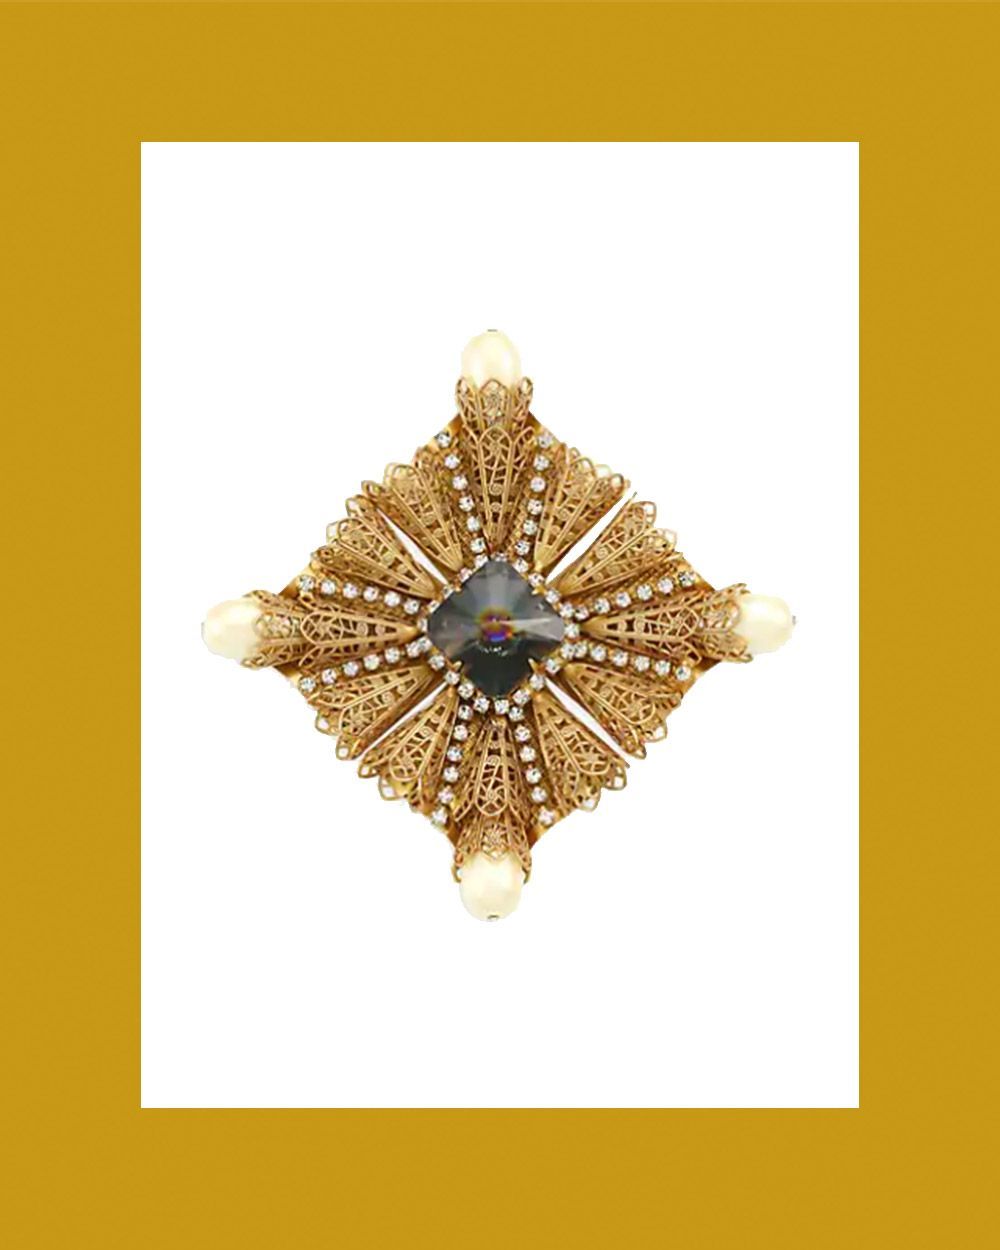 Antique Goldplated, Crystal & Faux-Pearl Brooch